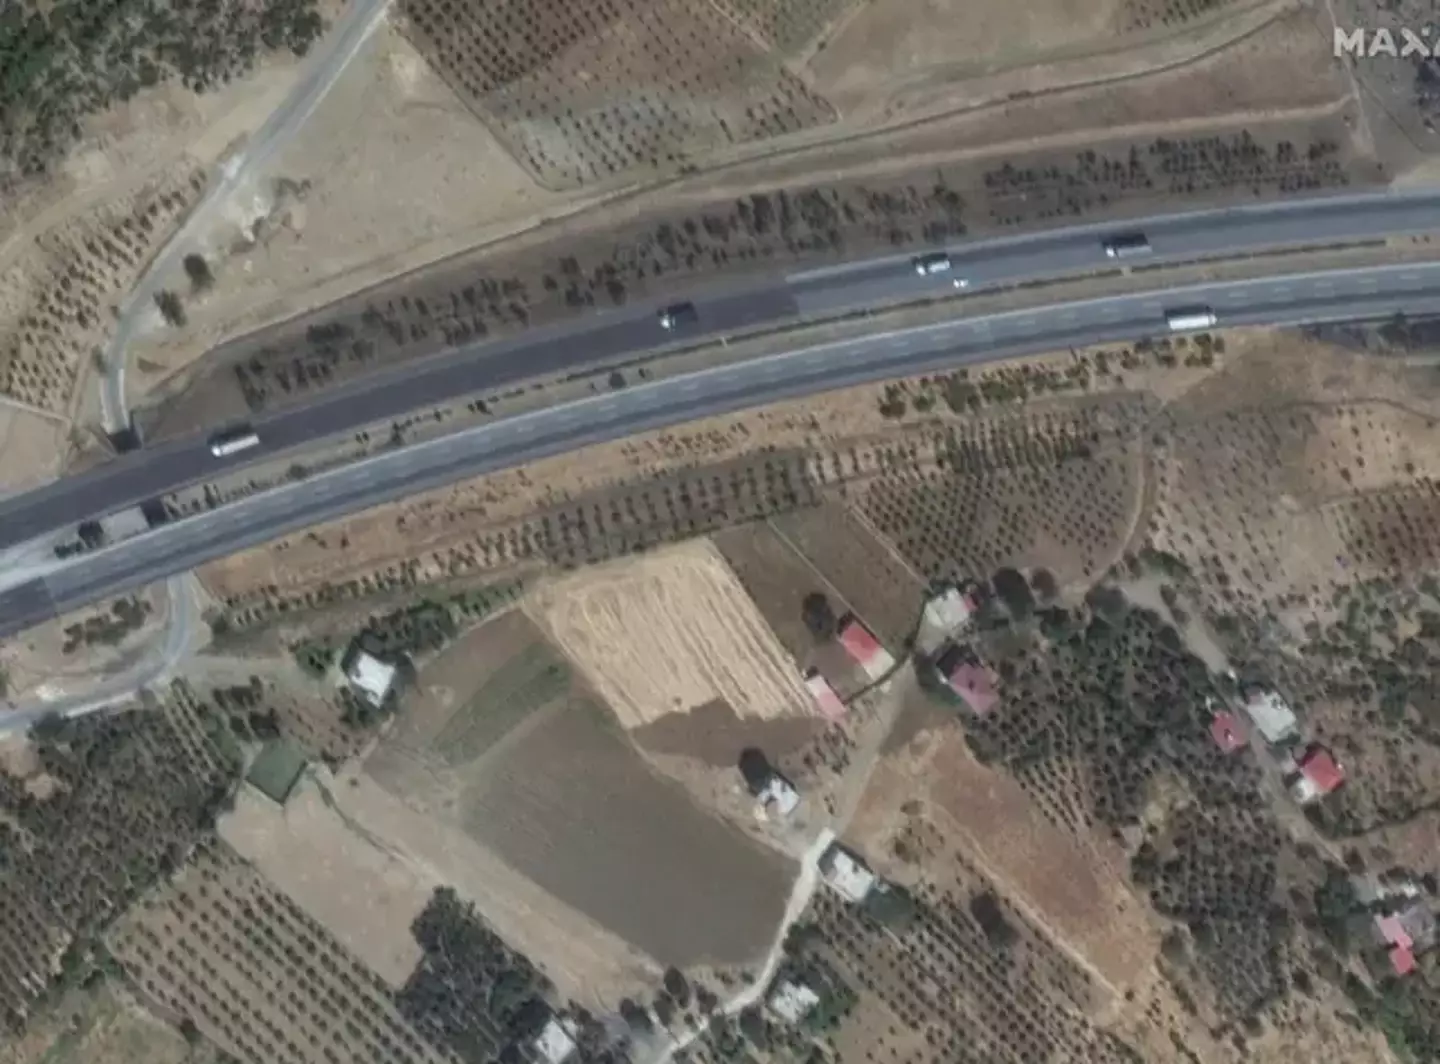 The site of the fault line before the earthquake (6 September 2019).